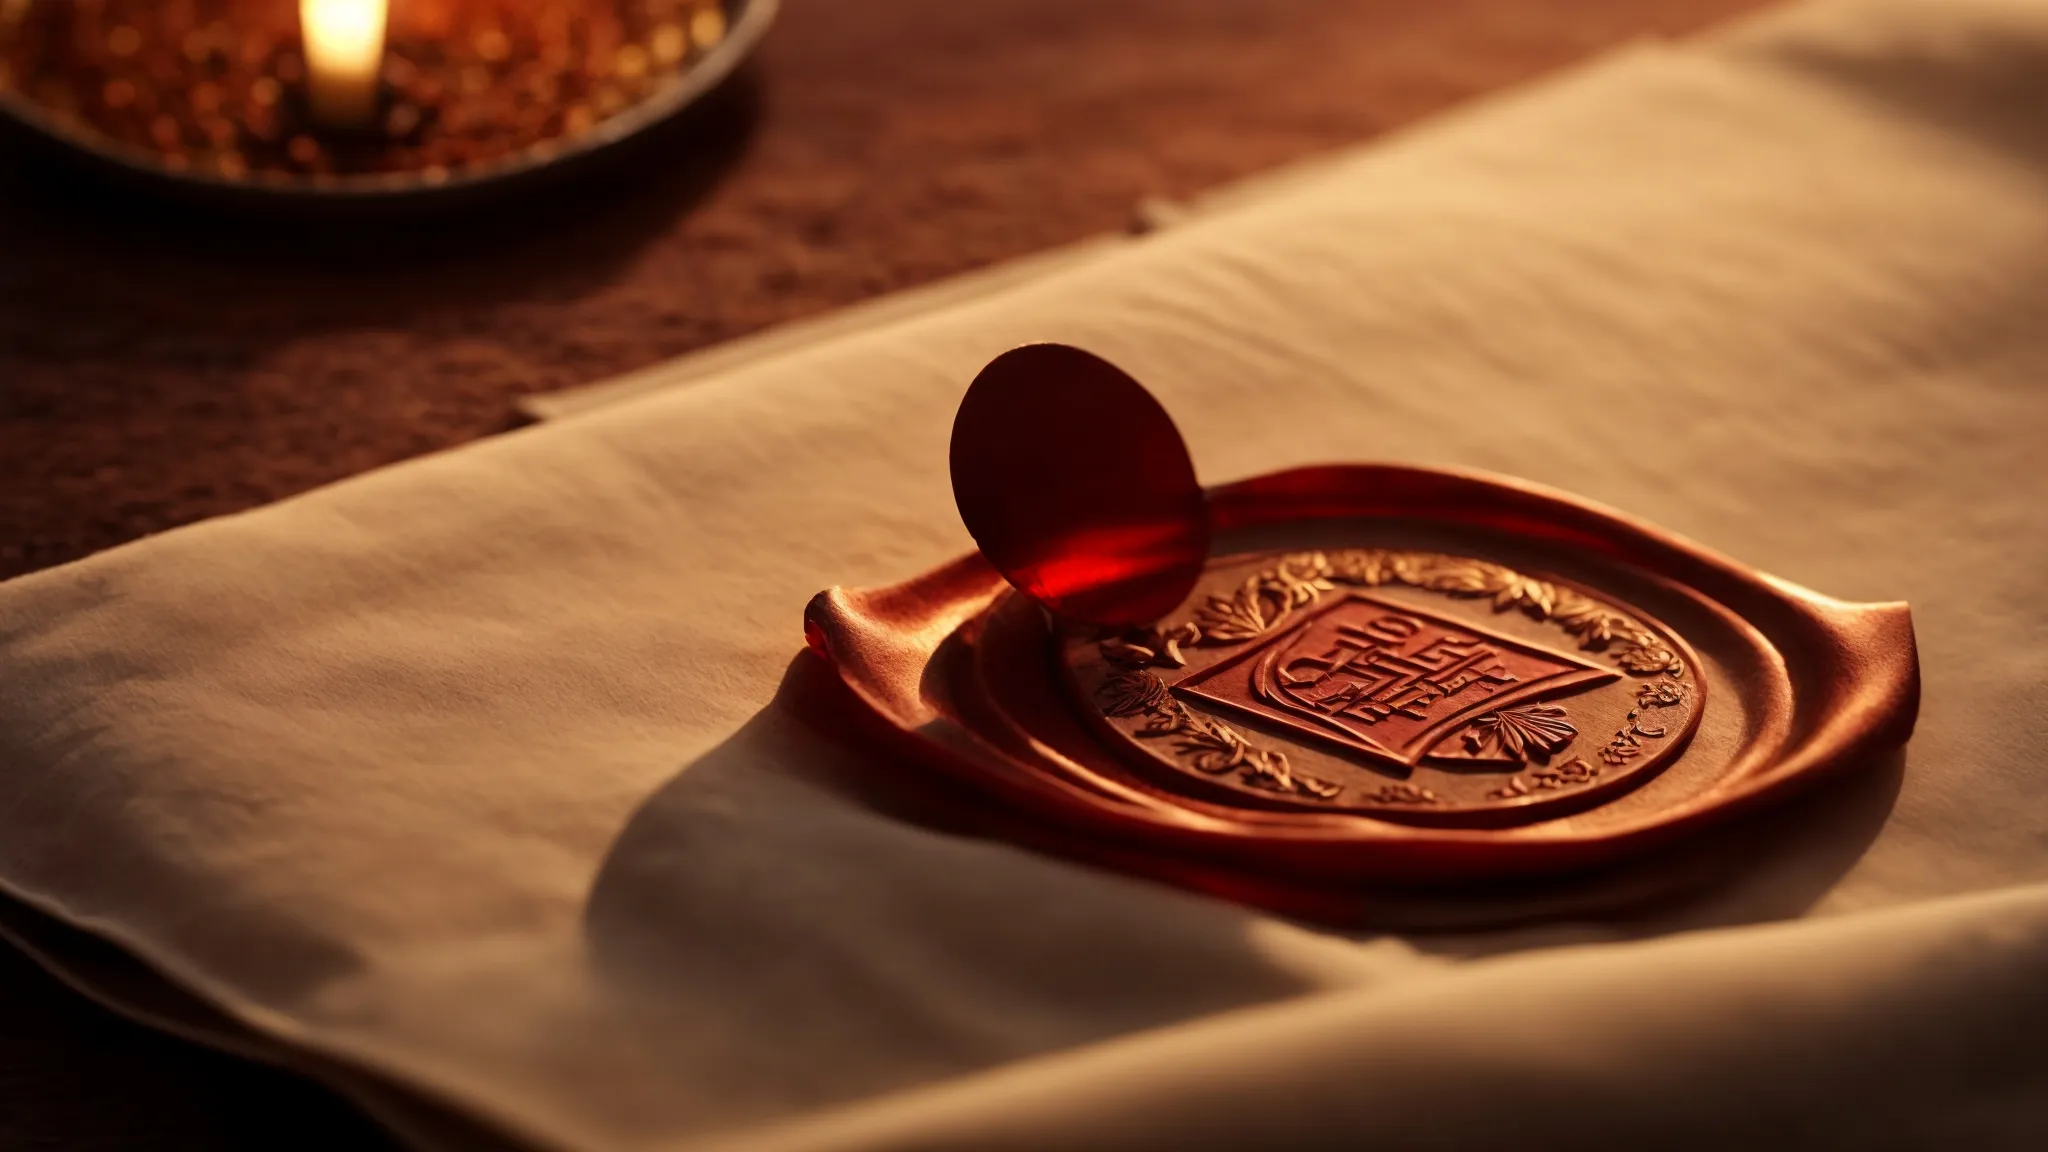 a wax seal pressed onto a parchment under warm candlelight, symbolizing authenticity and tradition amidst modernity.